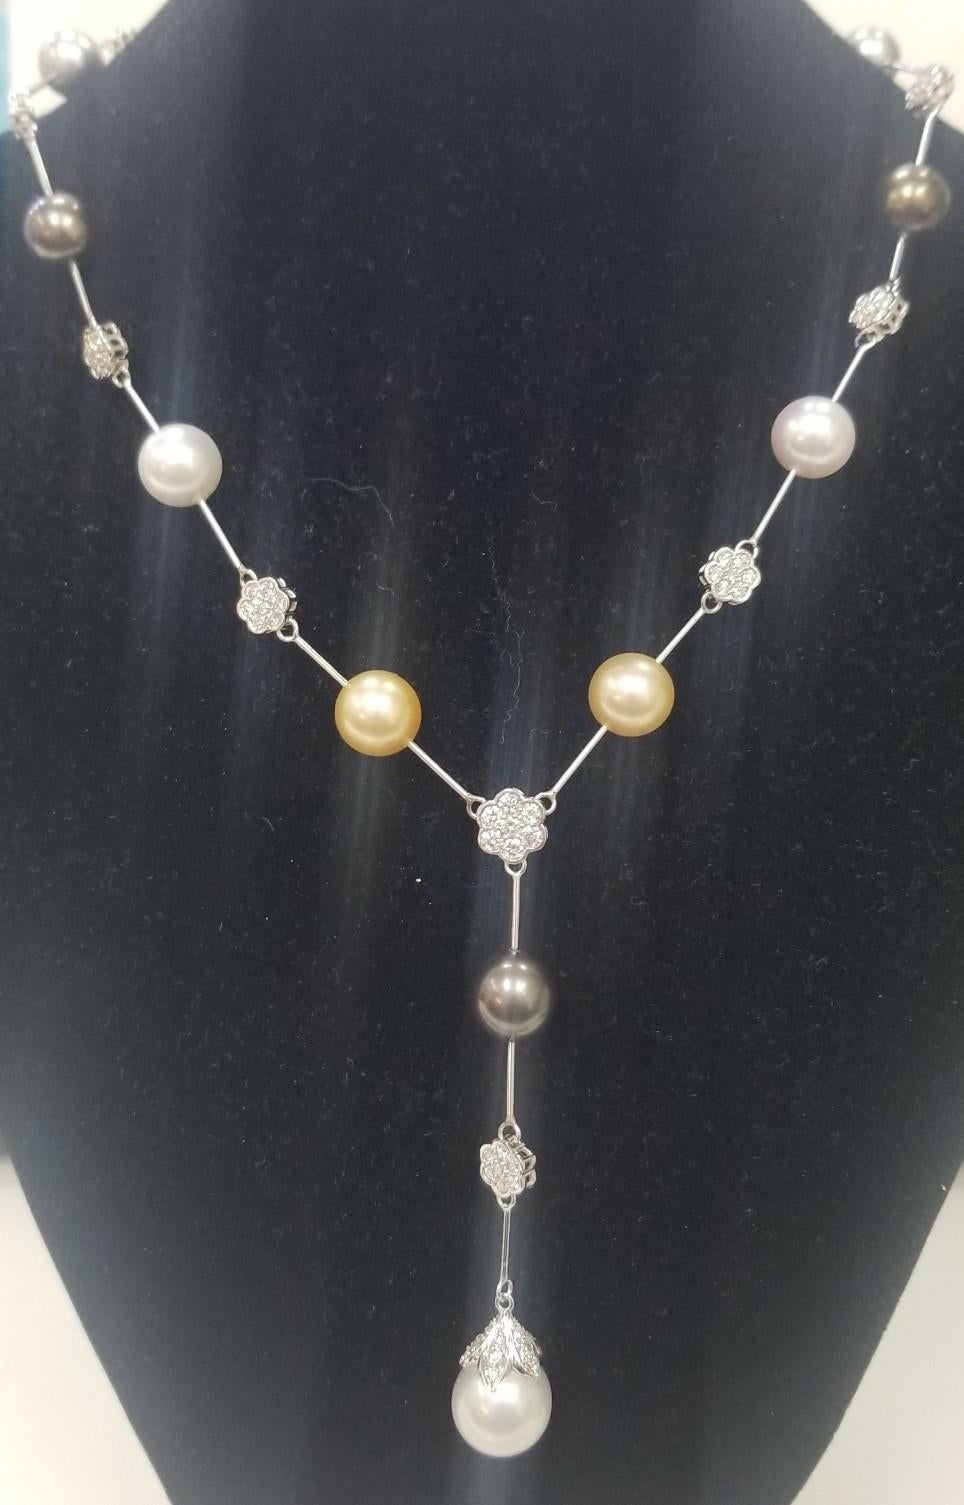 14k WG South Sea Pearl multi colored and diamond necklace, containing 10 multi natural colored south sea pearls measuring 9.5mm-12mm.  Also 108 round full cut diamonds; color 